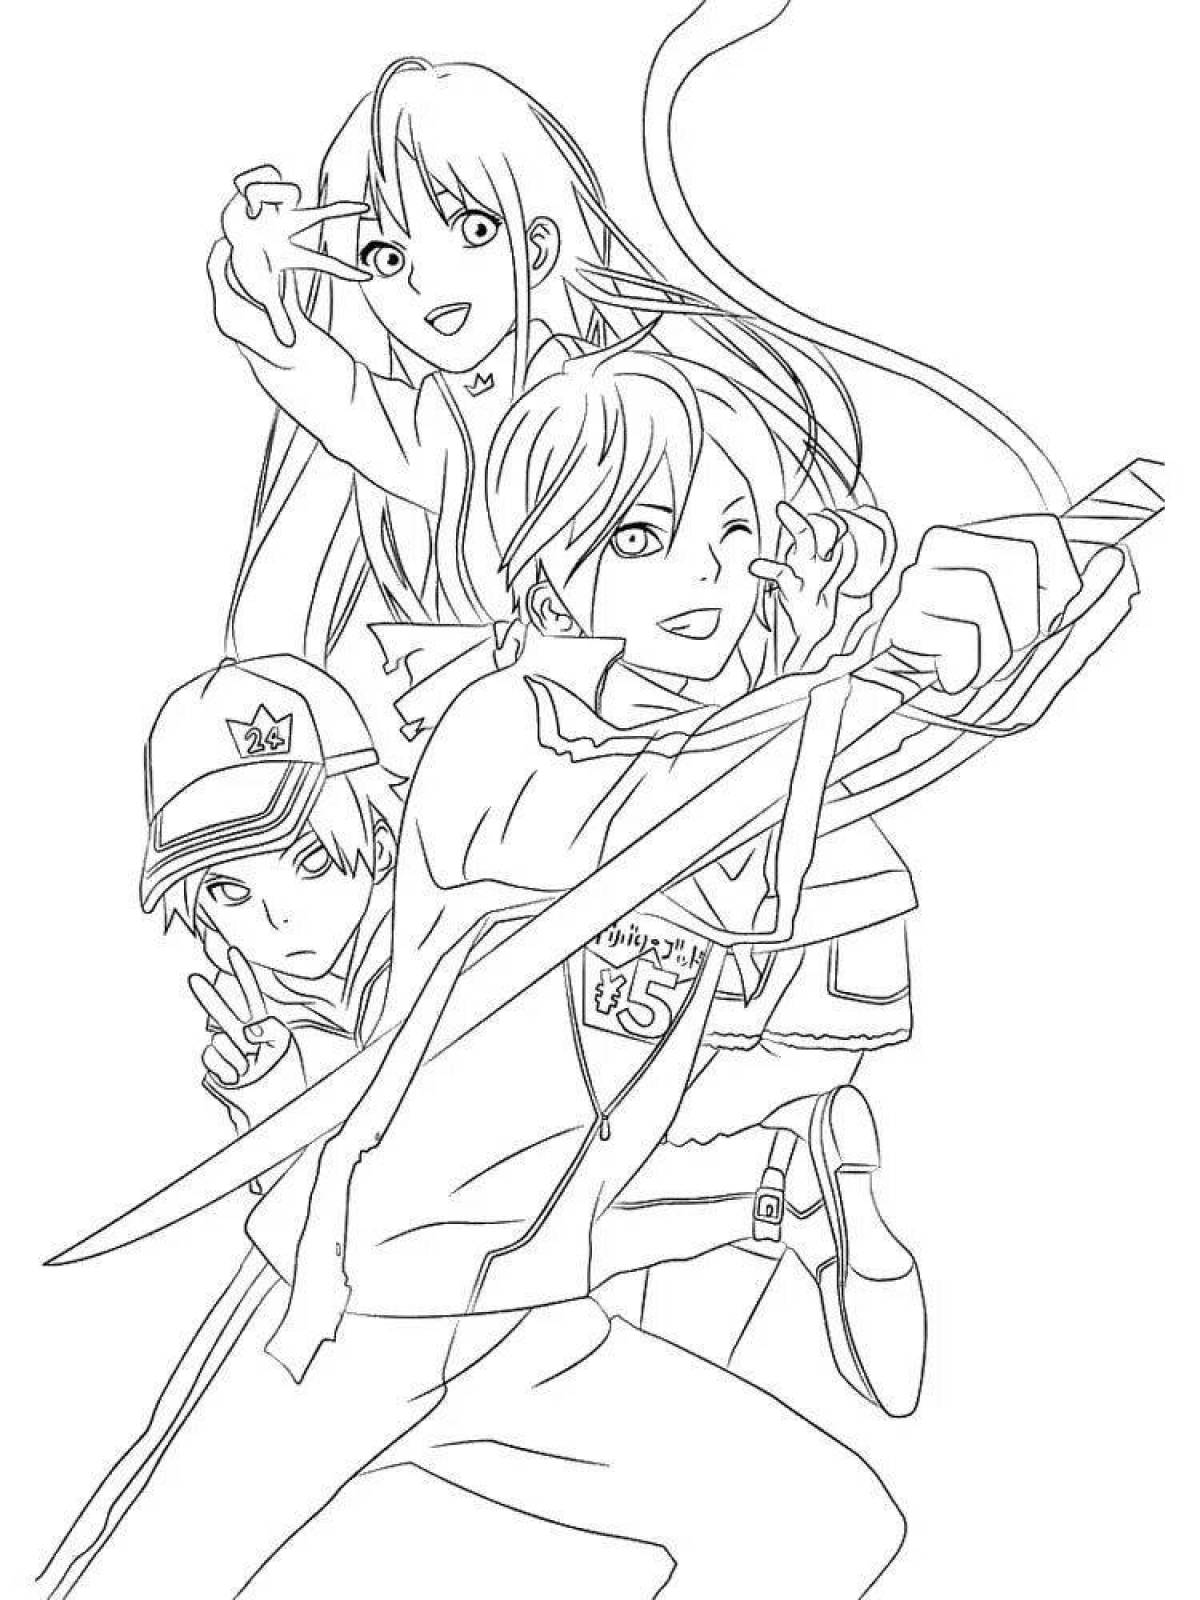 Blessed homeless god anime coloring book